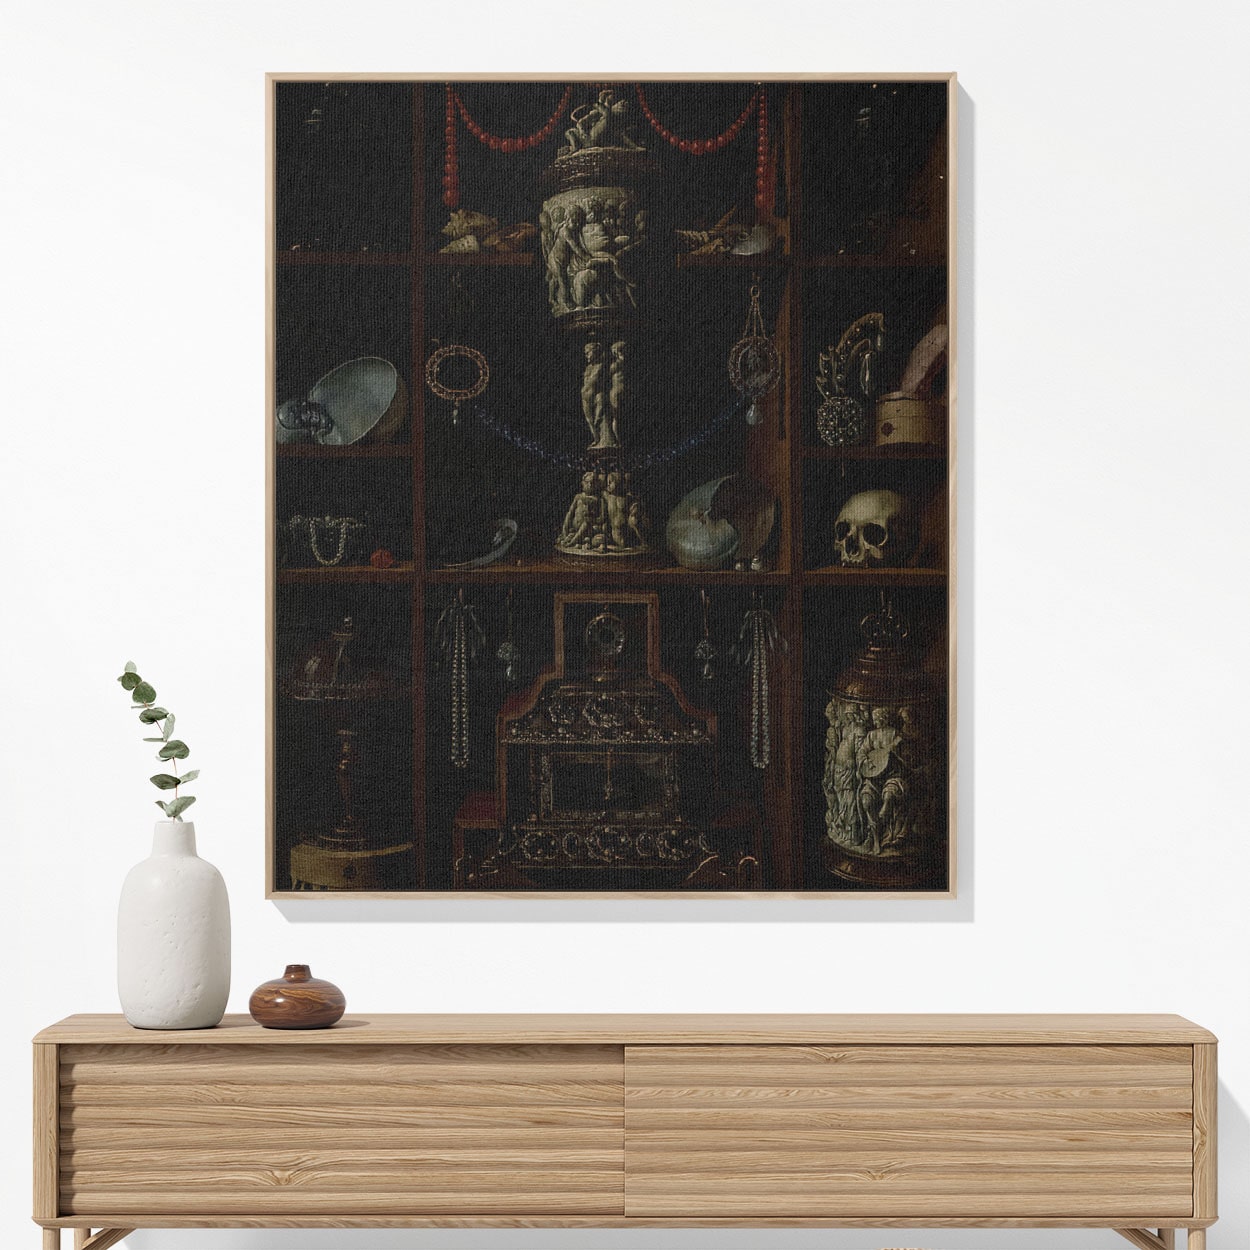 Dark Academia Aesthetic Woven Blanket Woven Blanket Hanging on a Wall as Framed Wall Art